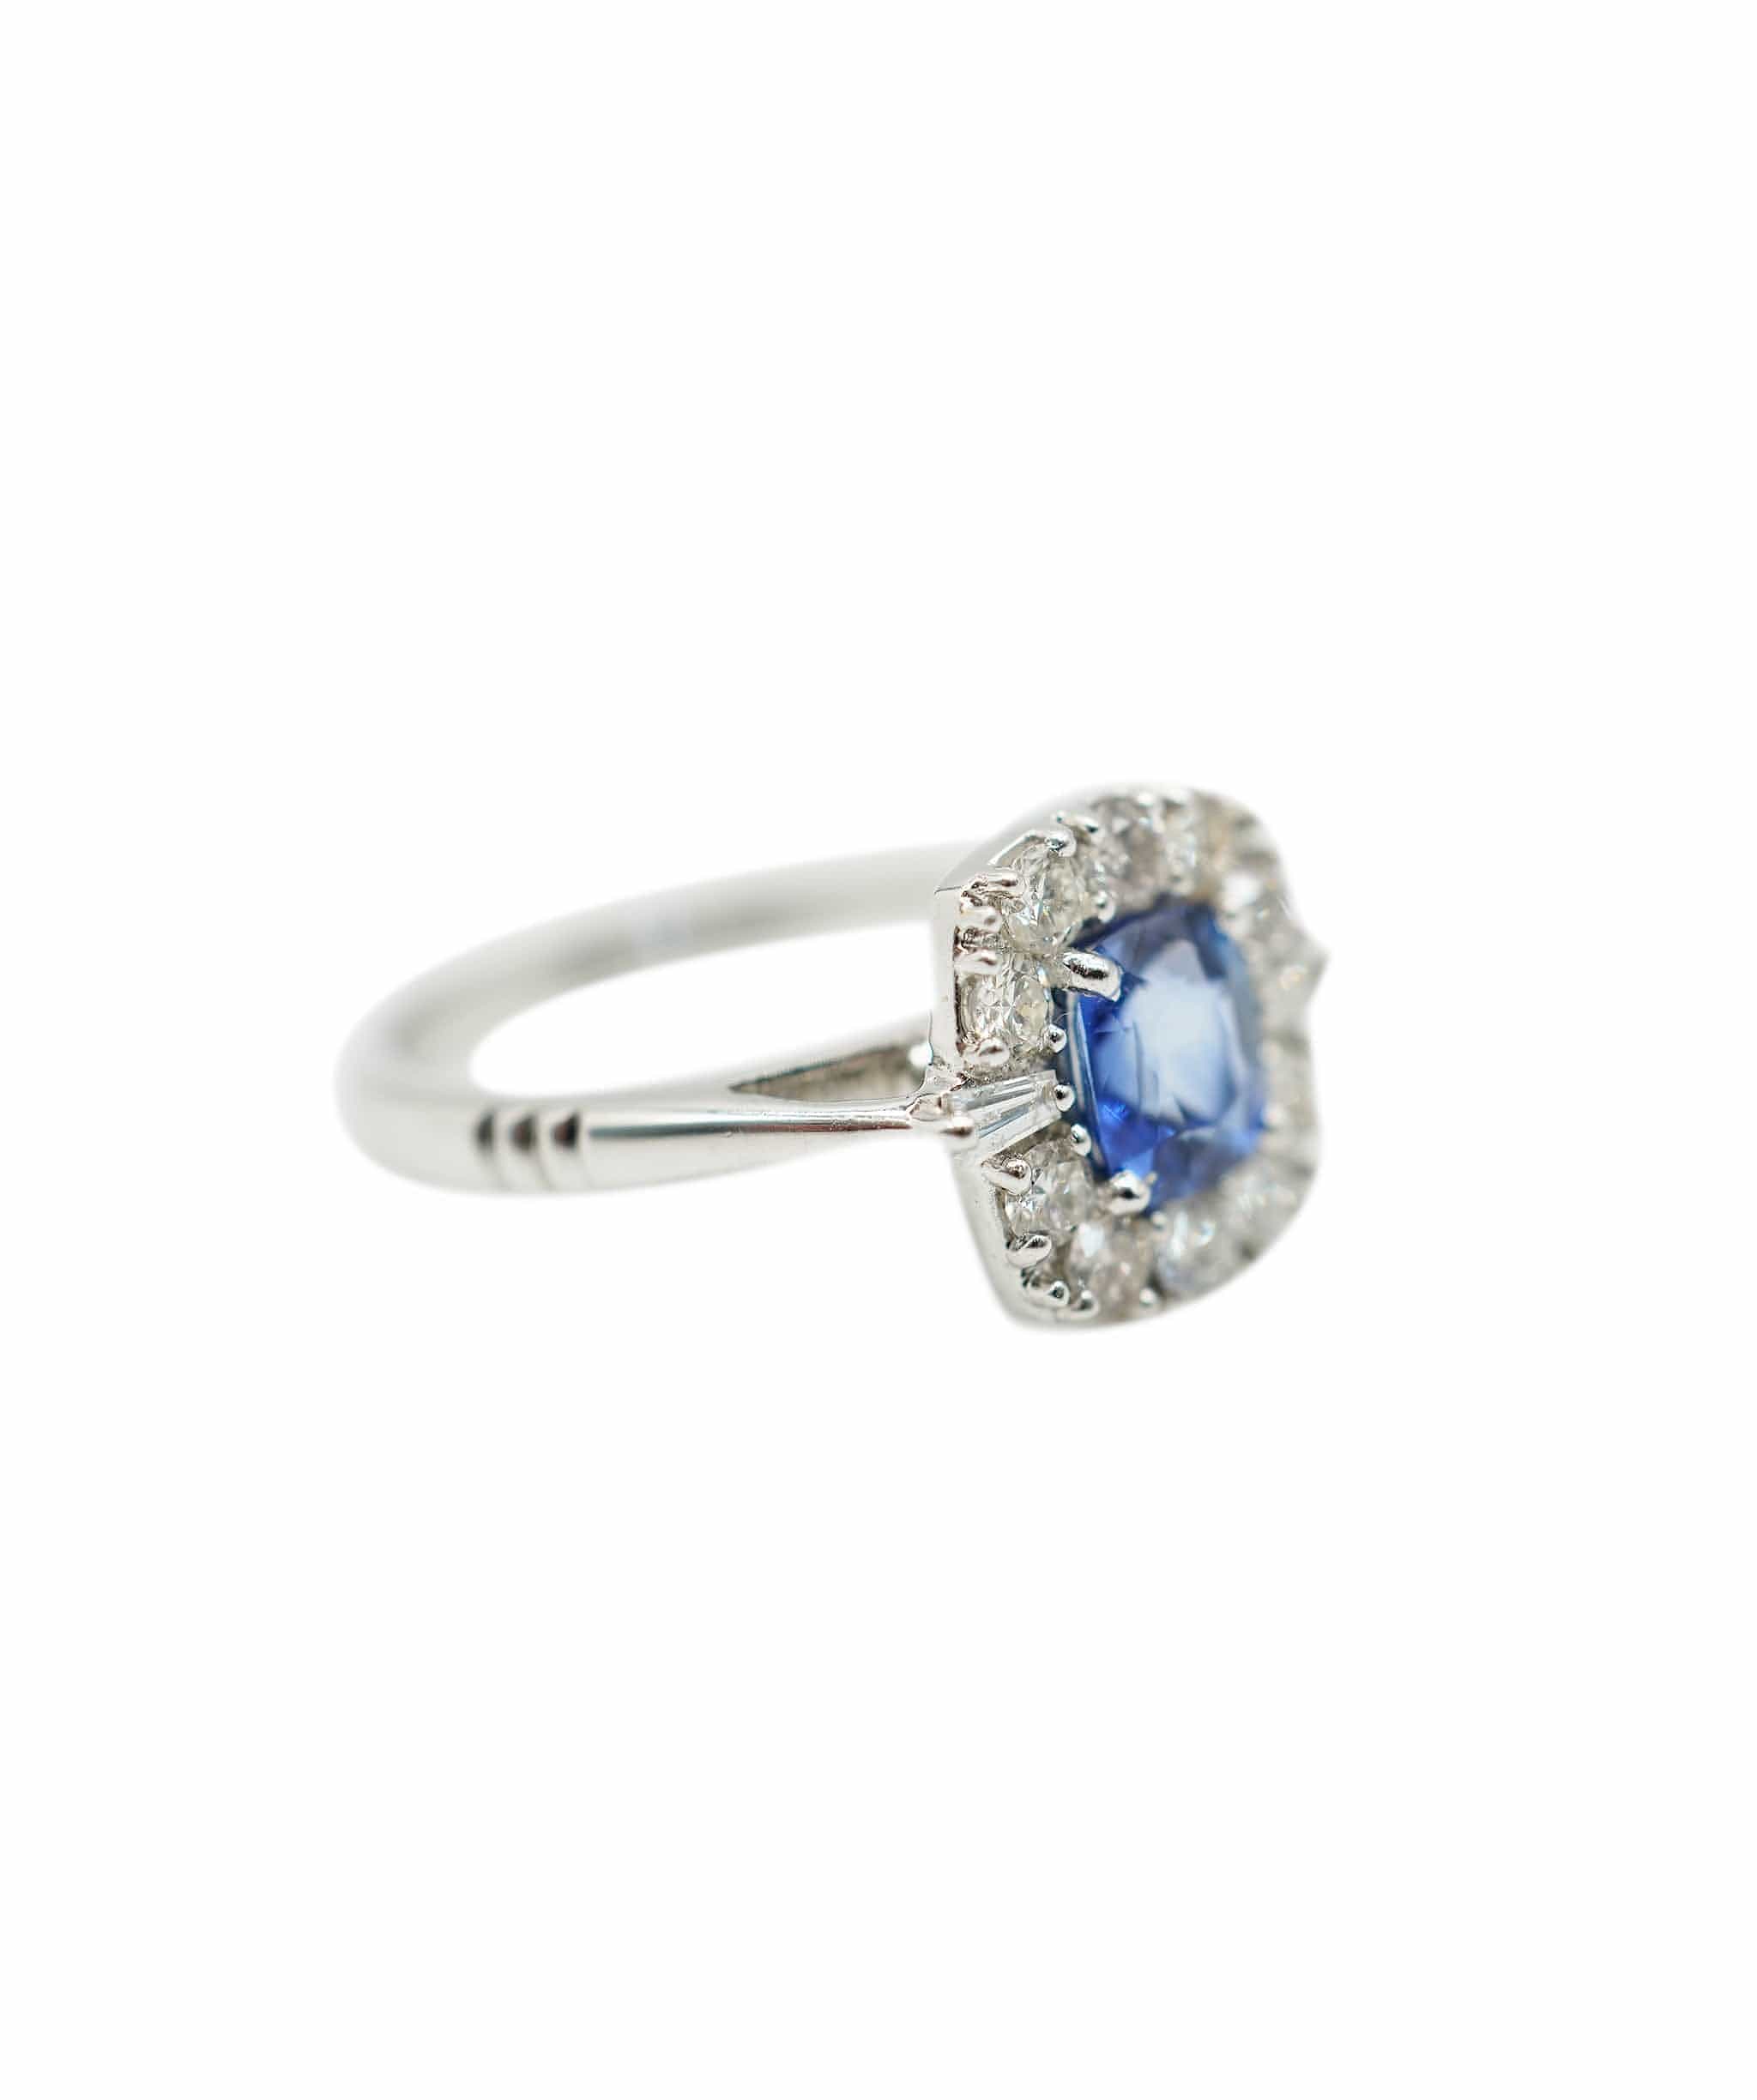 N/A Sapphire (0.95ct) and diamond (apx 0.45ct total) cluster ring 18K WG AHC1191